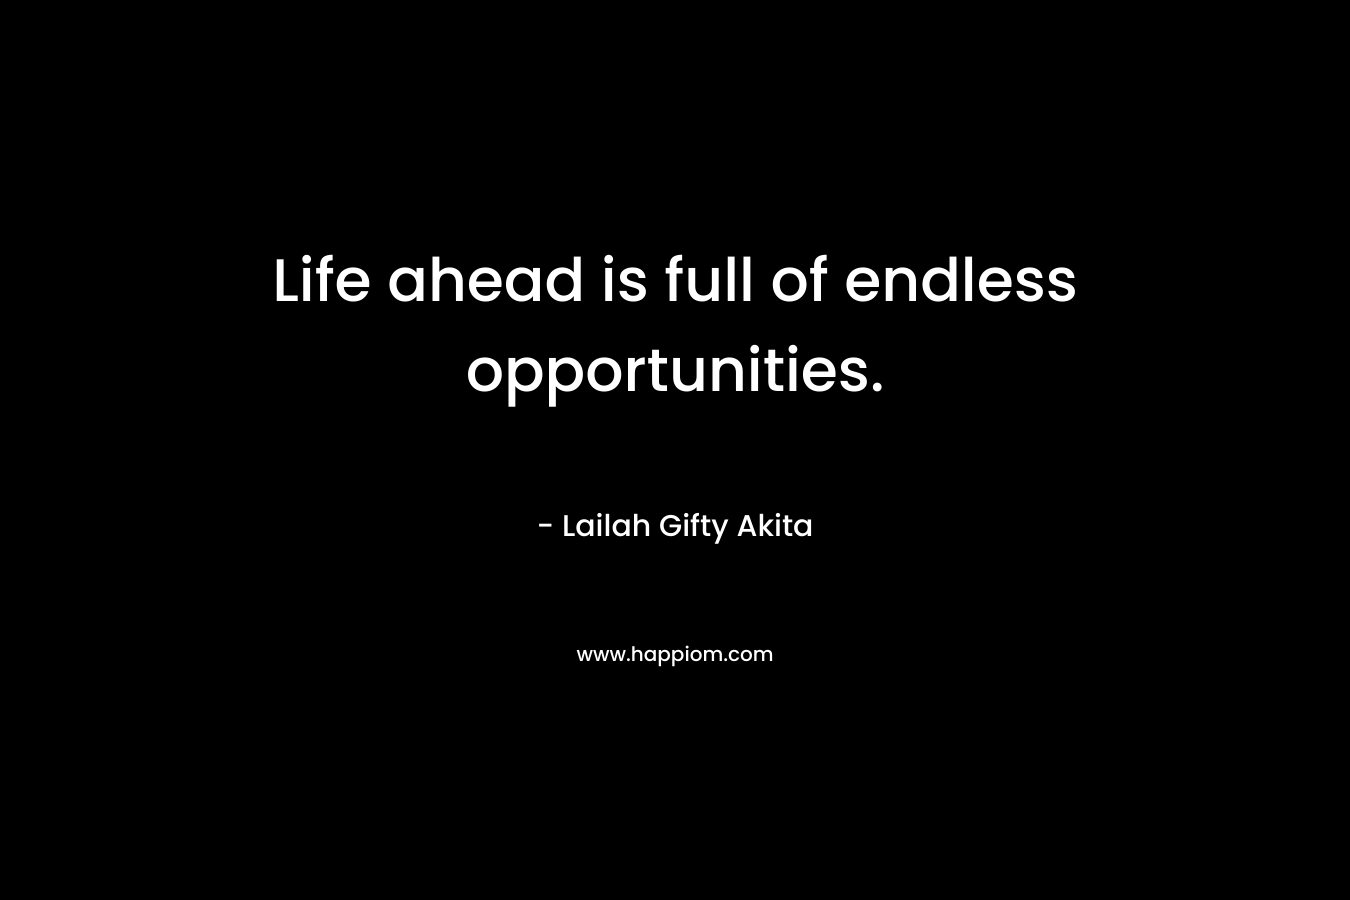 Life ahead is full of endless opportunities.